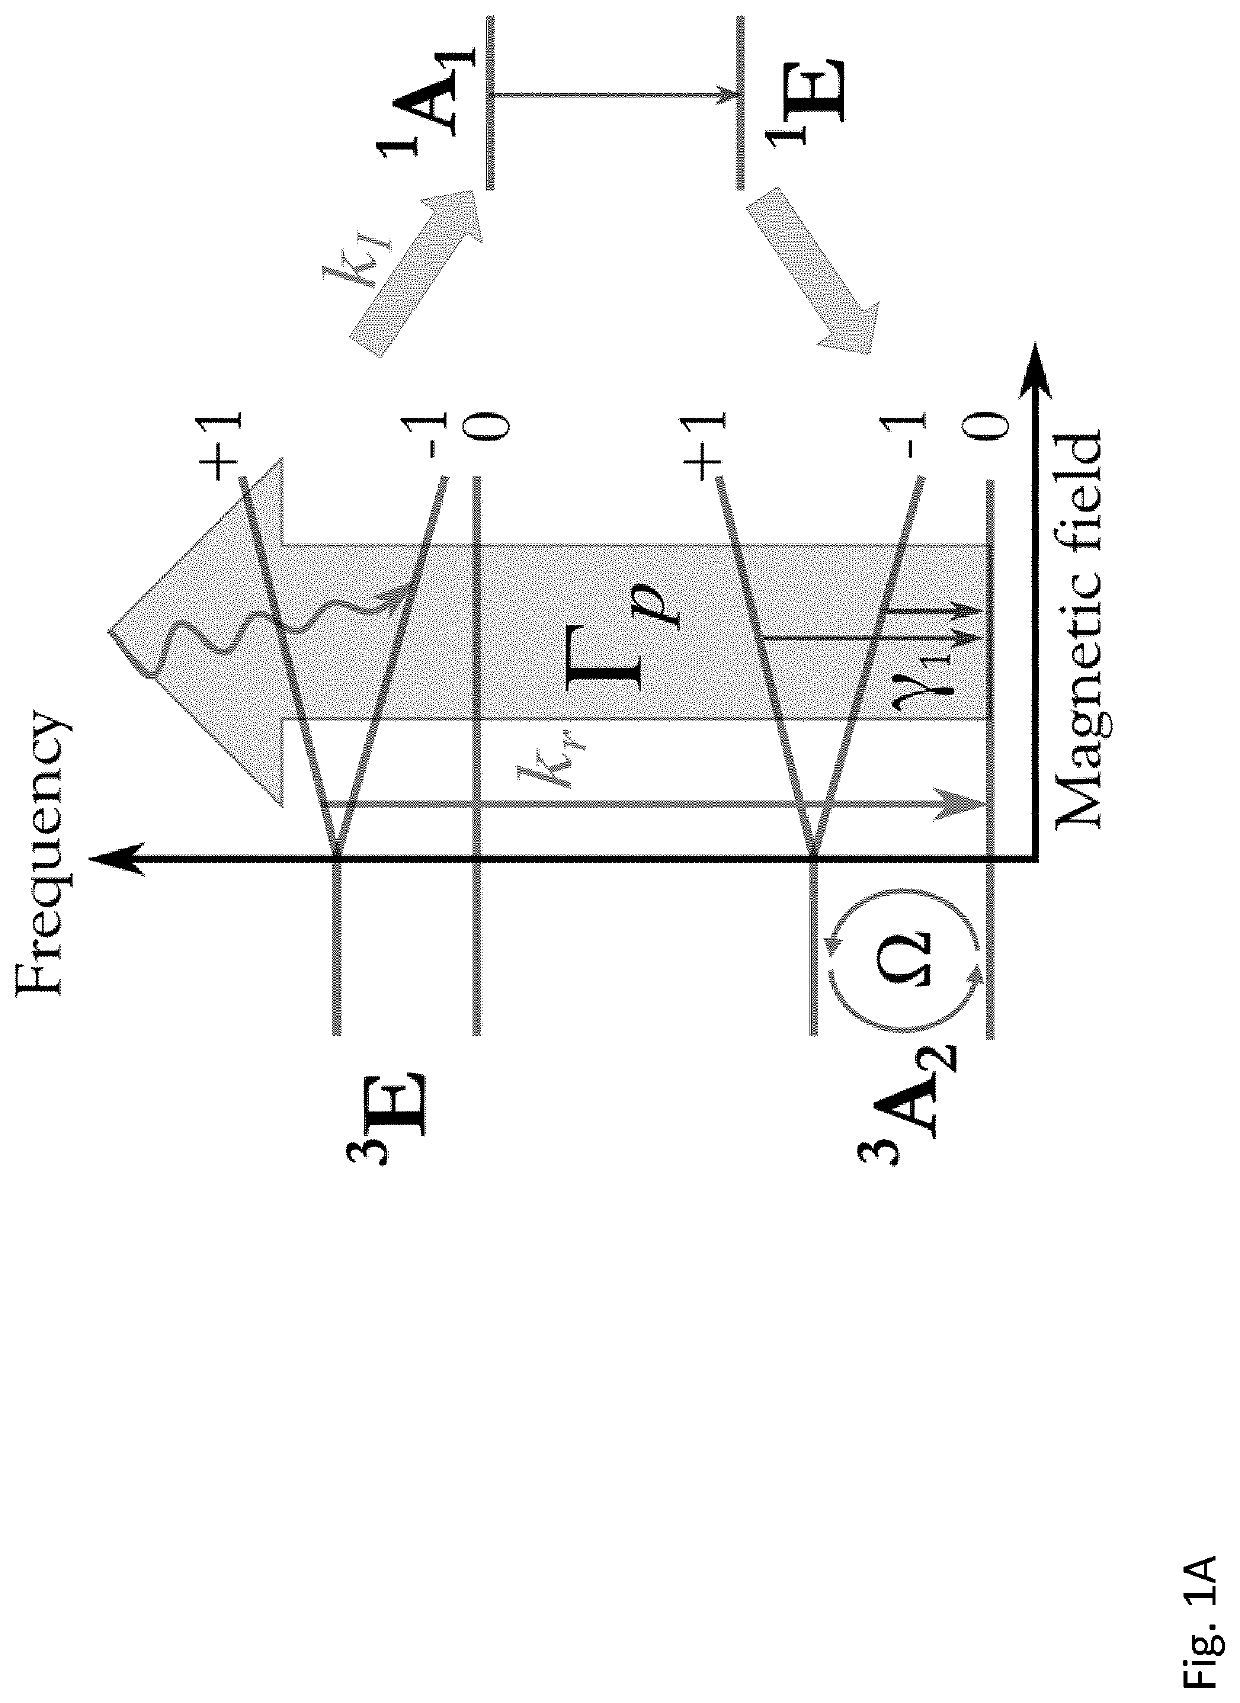 A magnetometer using optically active defects in a solid state material